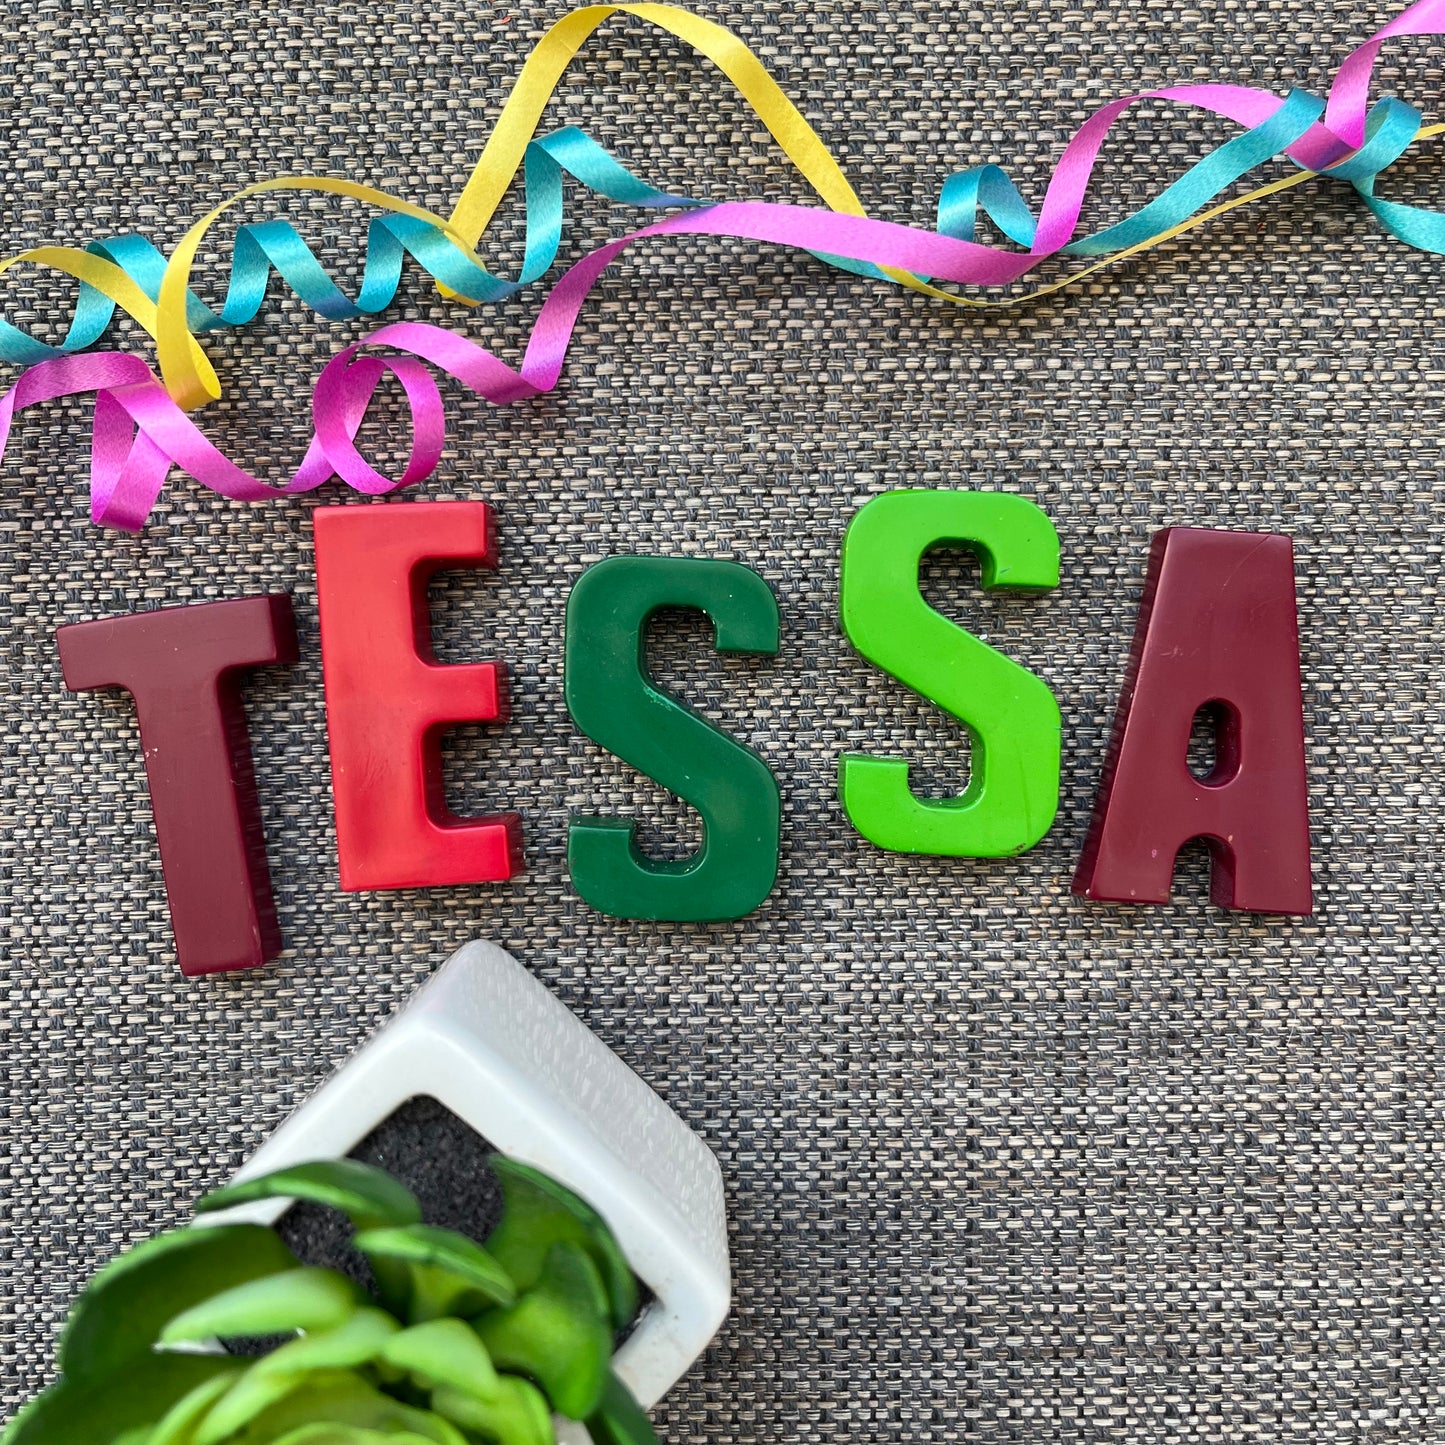 name TESSA is crayons. T is burgundy, E is red, S is dark green, S is light green and A is burgundy